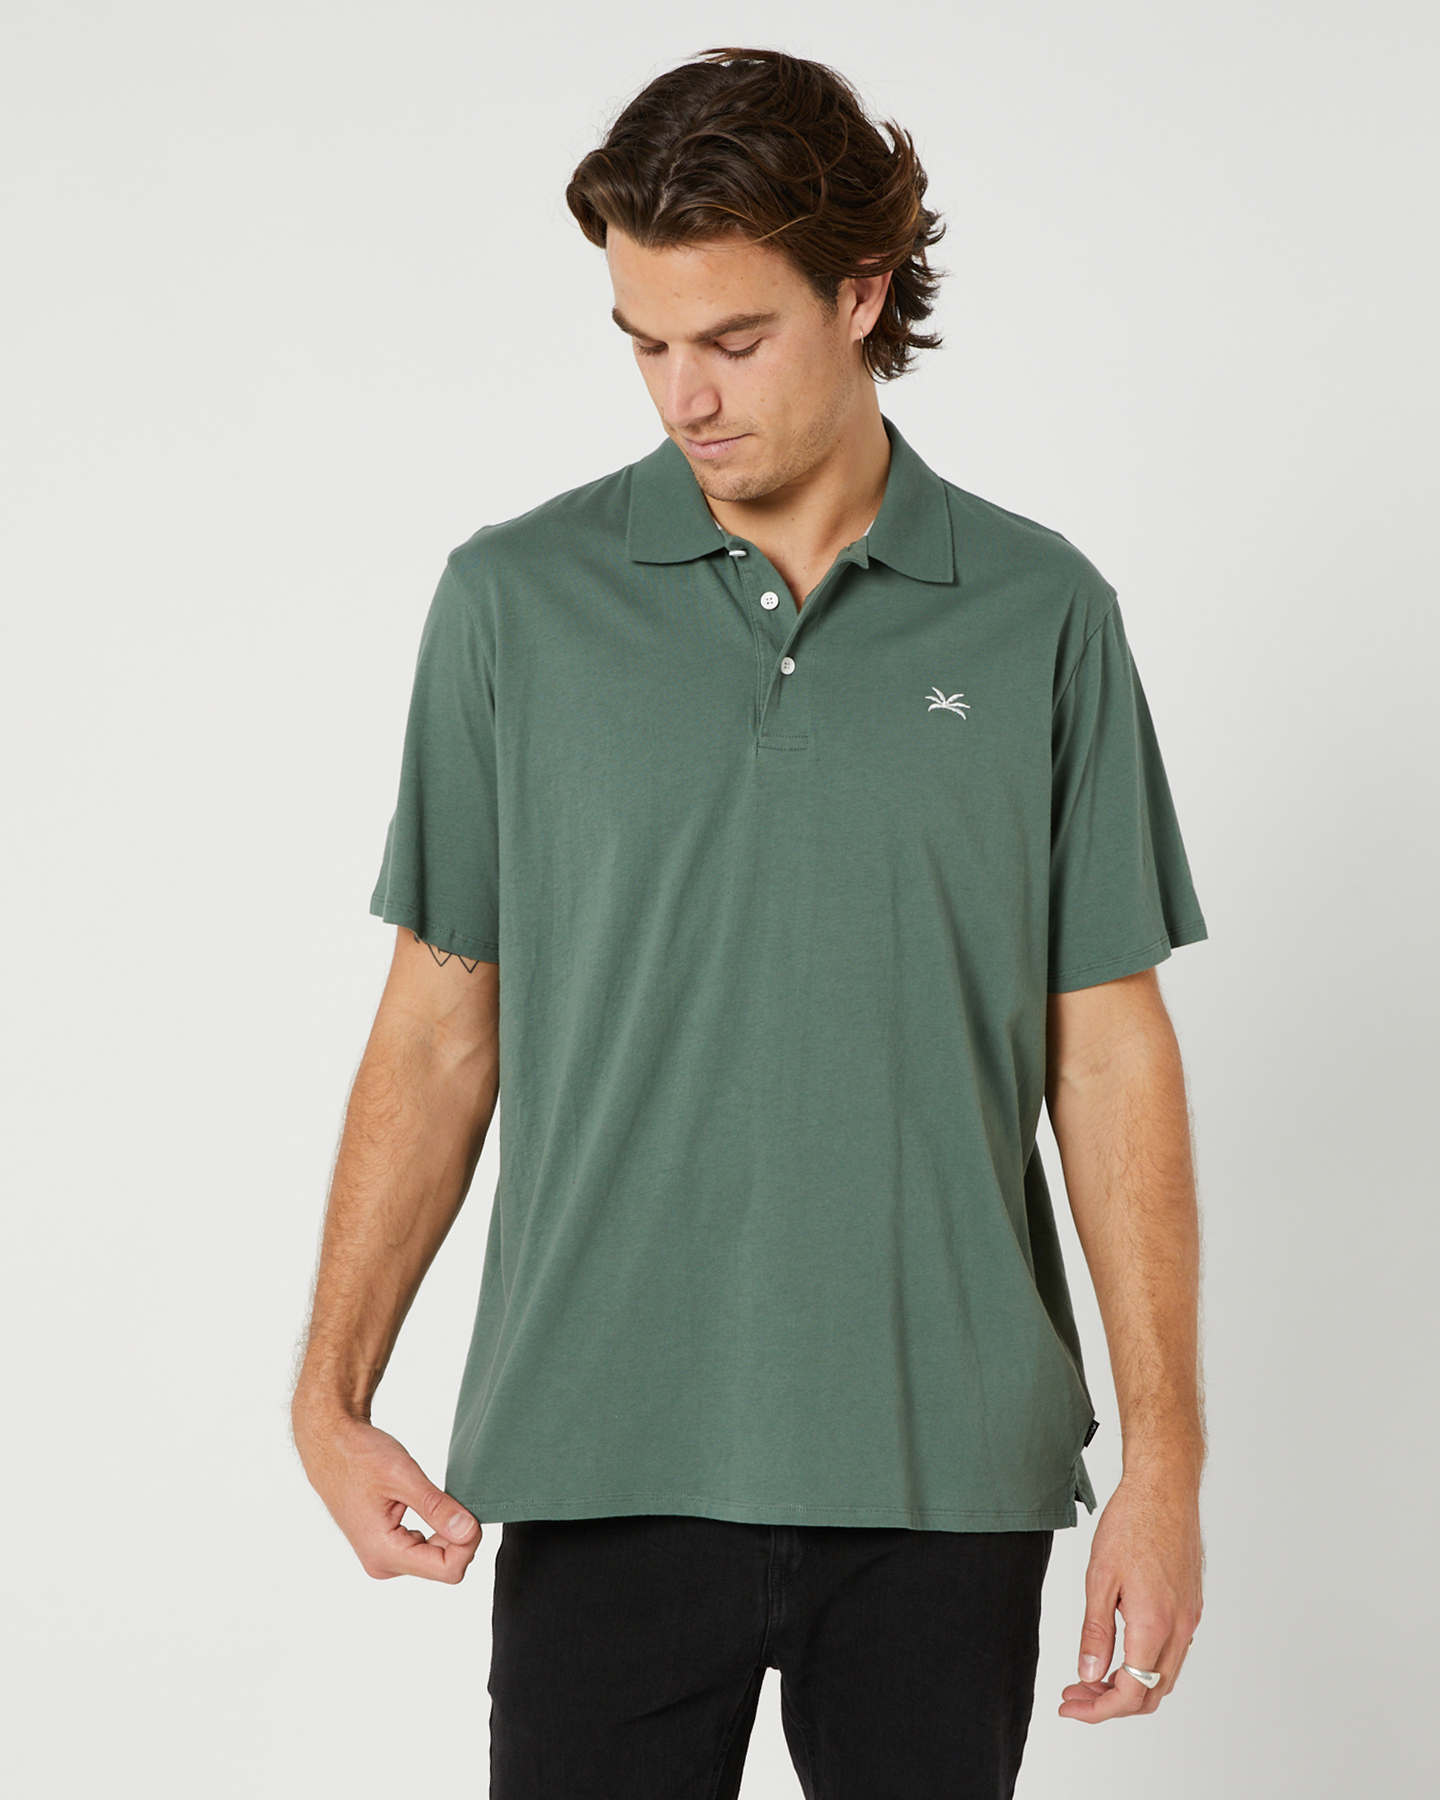 Swell Fairway Ss Polo - Green Bay | SurfStitch